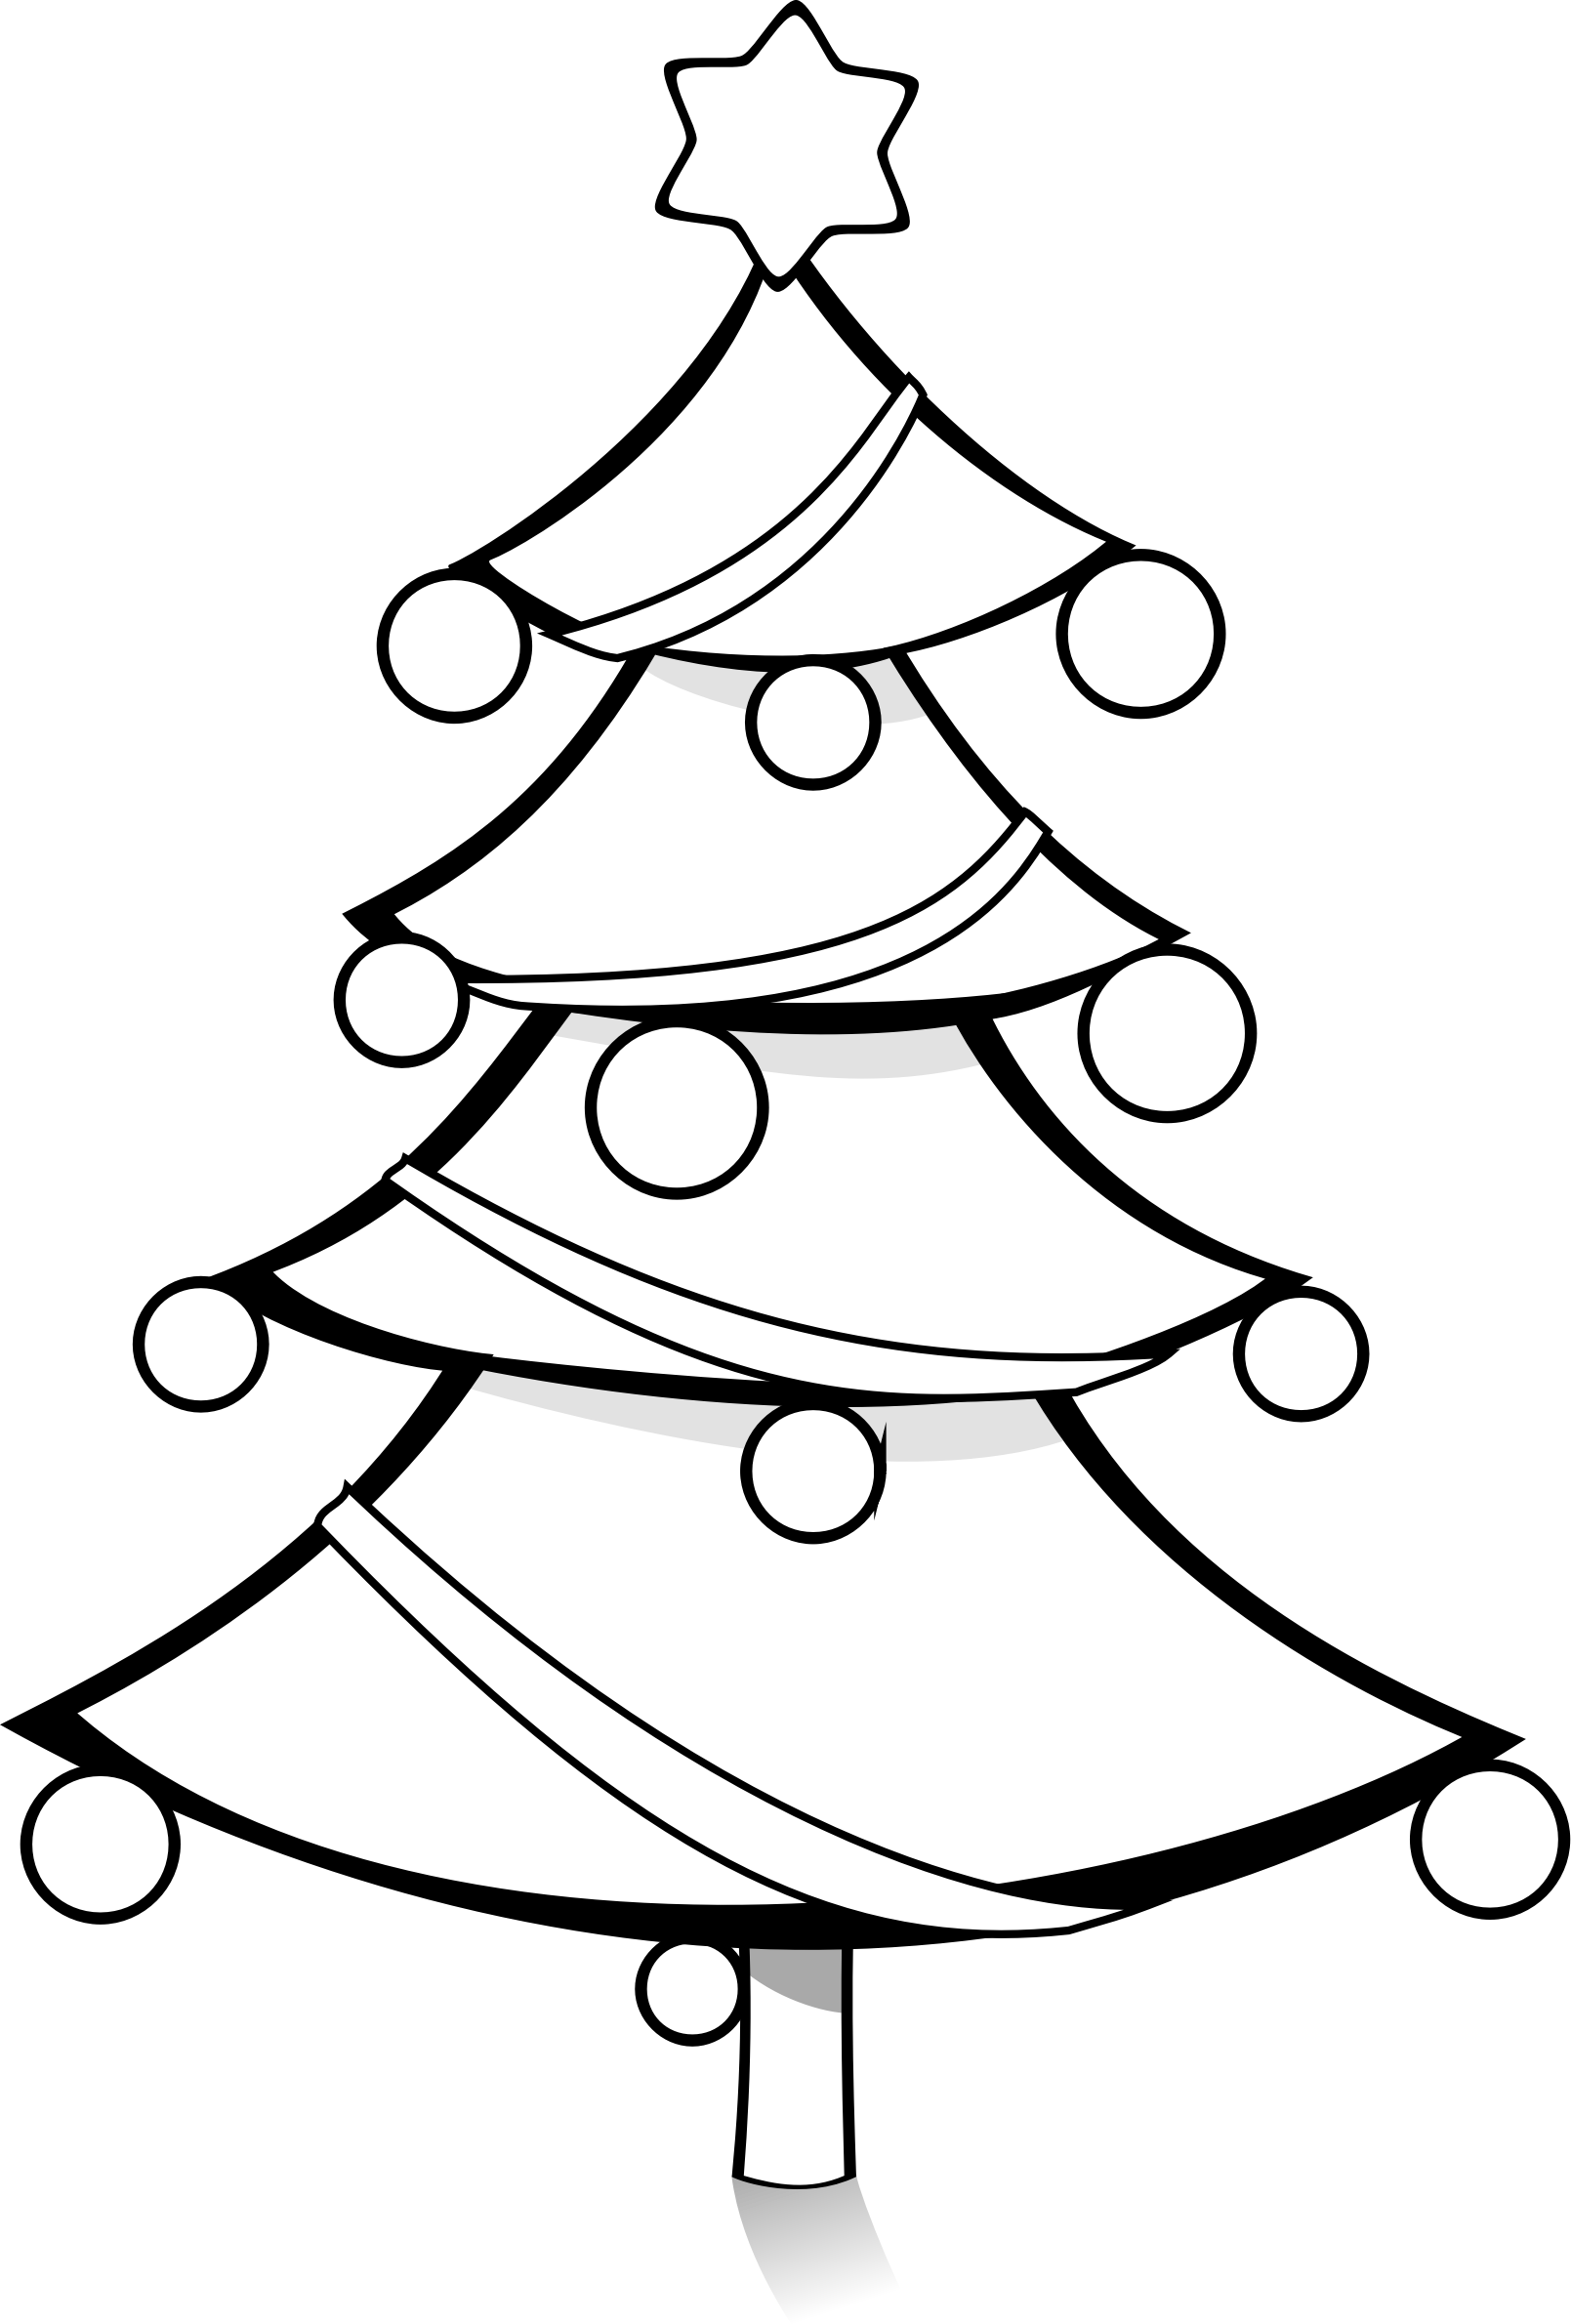 Christmas Tree Clipart Black And White 60 Cliparts